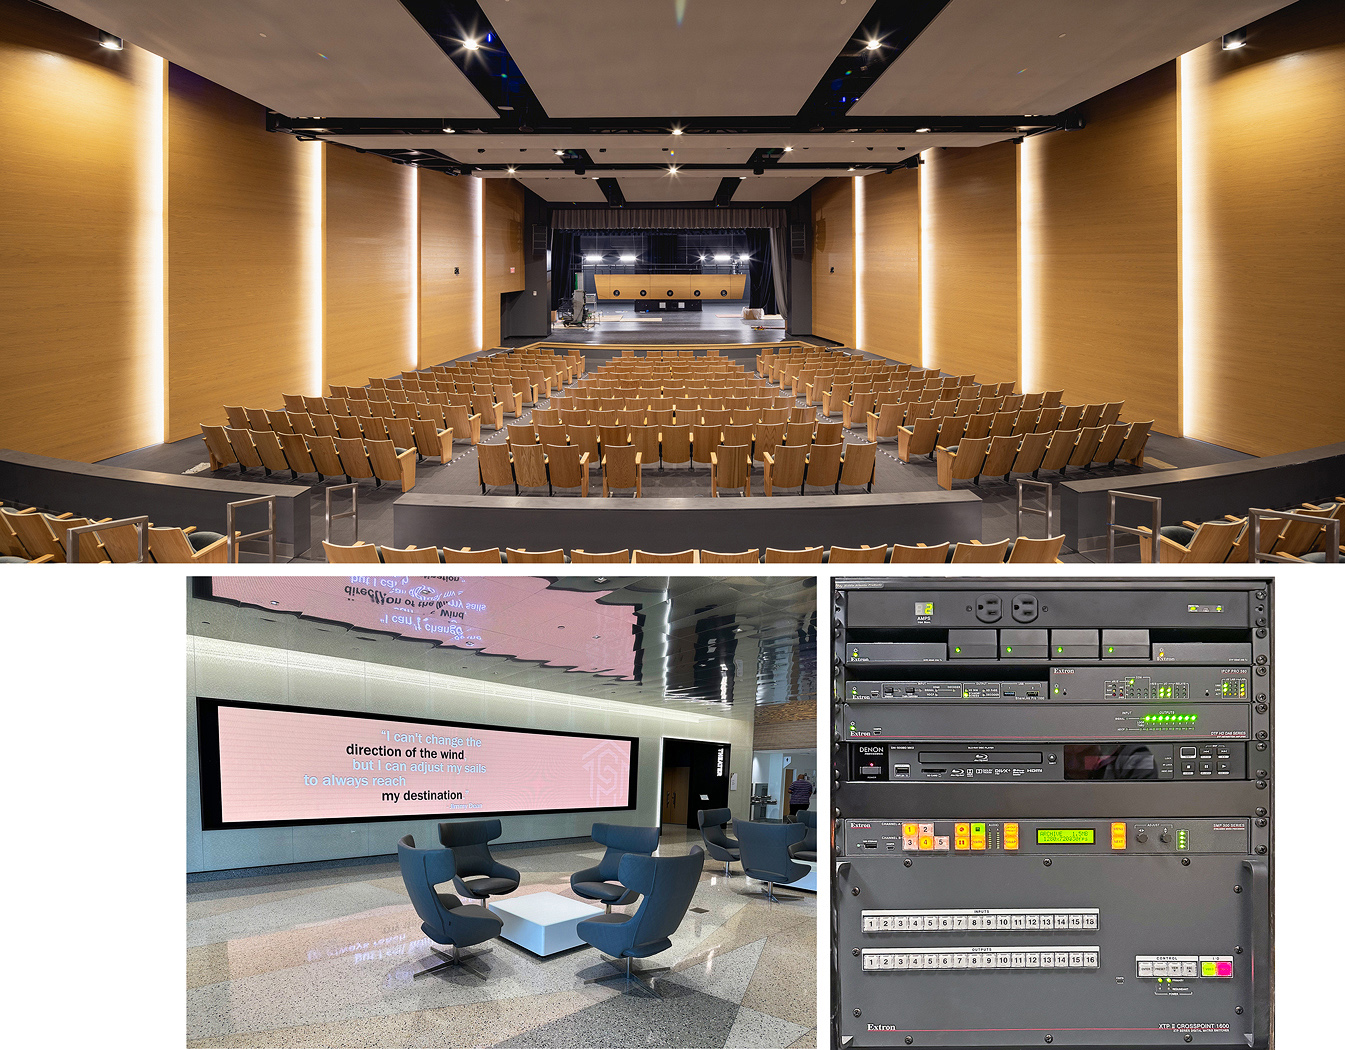 An XTP II CrossPoint 1600 Digital Matrix Switcher connects AV content sources to the main stage projector, to multiple flat panel displays in the lobby, and to the lobby's 6x31 foot LED videowall marquee. An MGP 641 Multi-Window Processor populates the videowall with up to four source windows on a single canvas, with a live or static background.